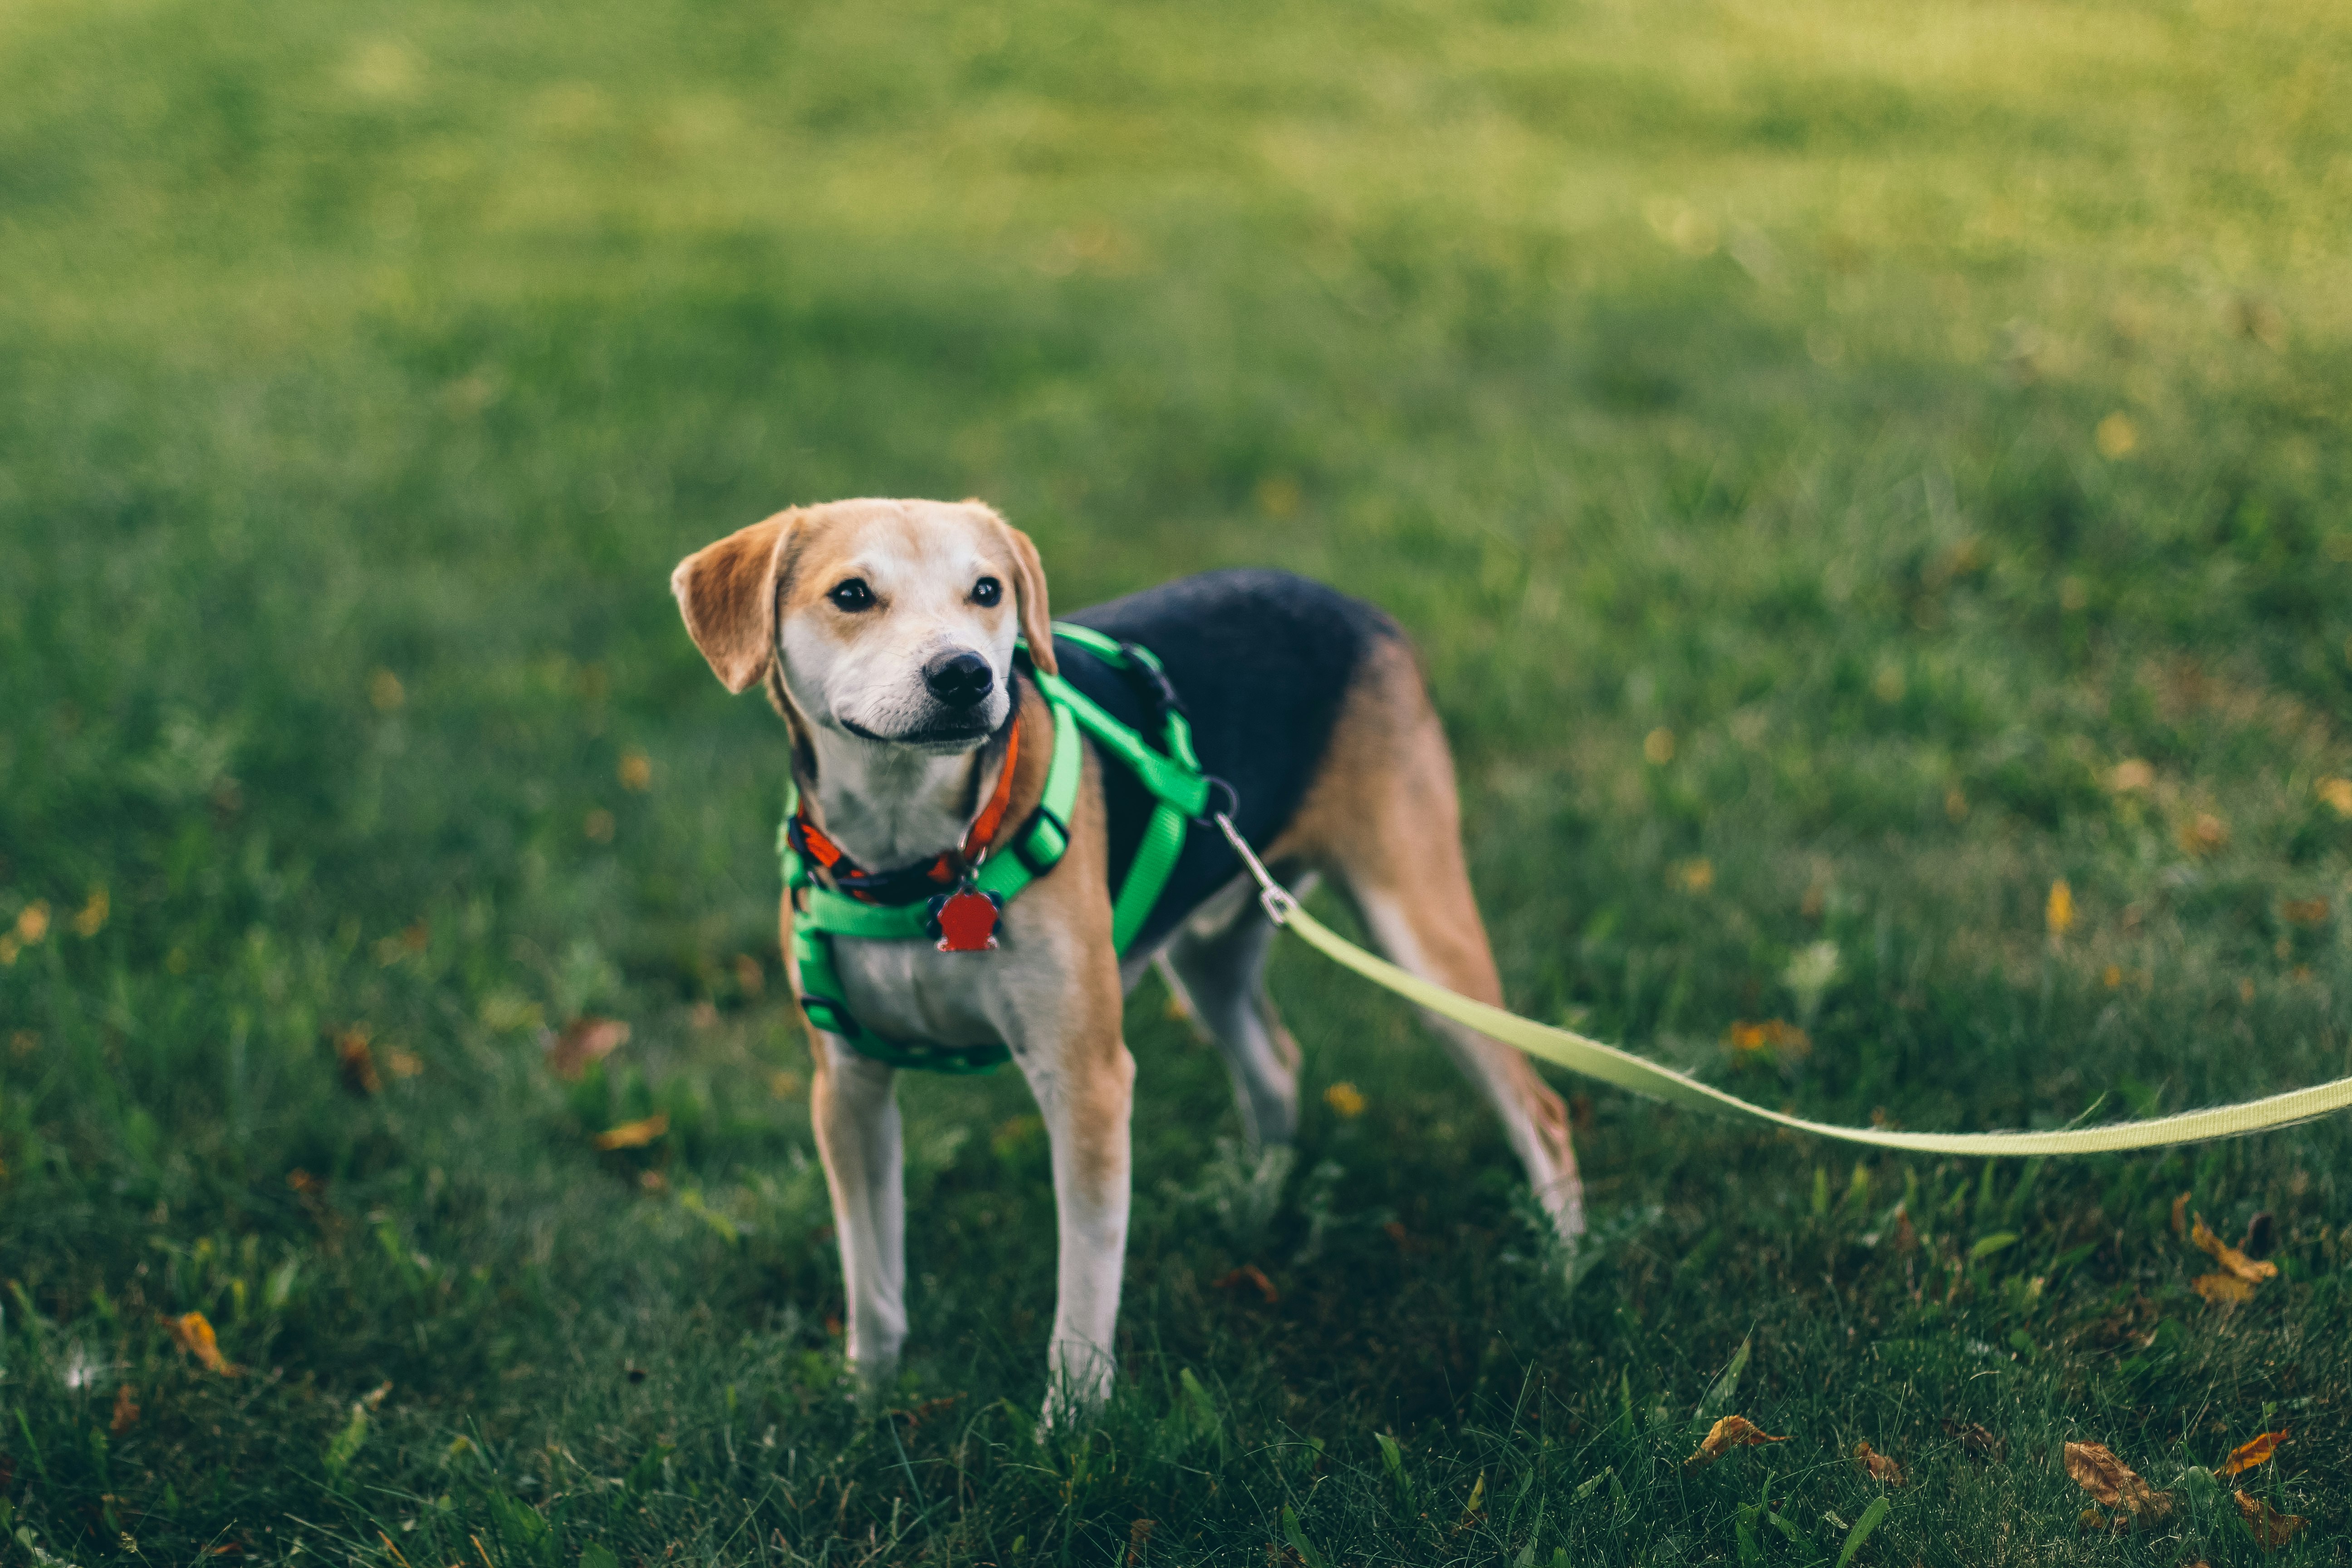 short-coated tan and black dog with green harness standing on green grass